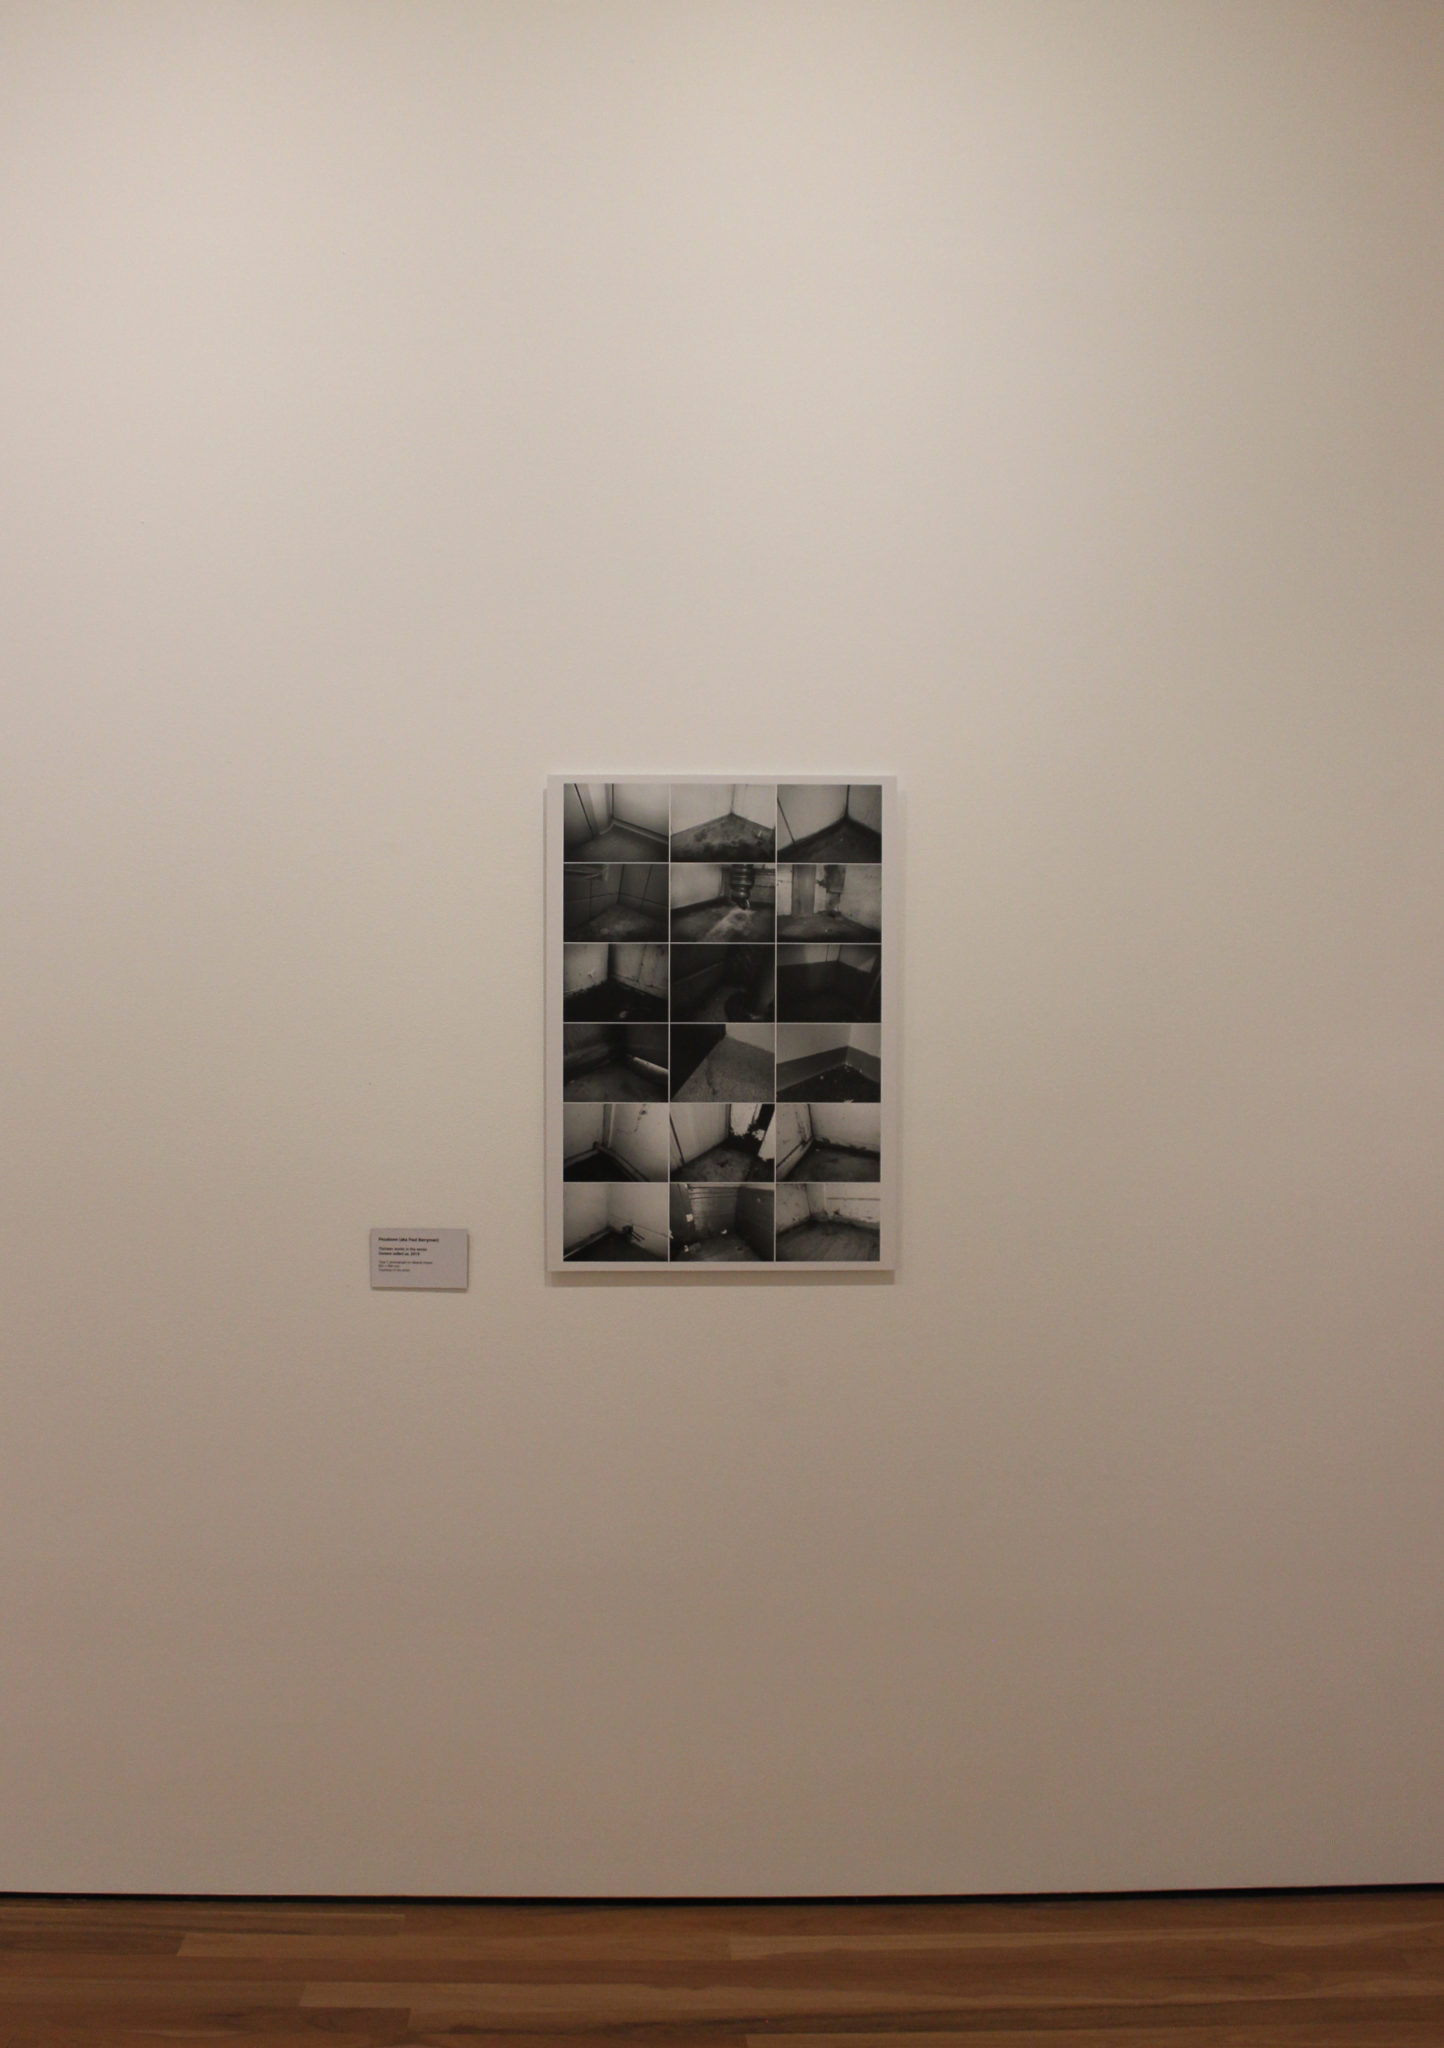 Installation view of Pezaloom, Corners collect us, 2019, Type C photograph on dibond mount, 84.1 x 59.4 cm, Courtesy the artist. Shown Gallery 4, Latrobe Regional Gallery, 2020.